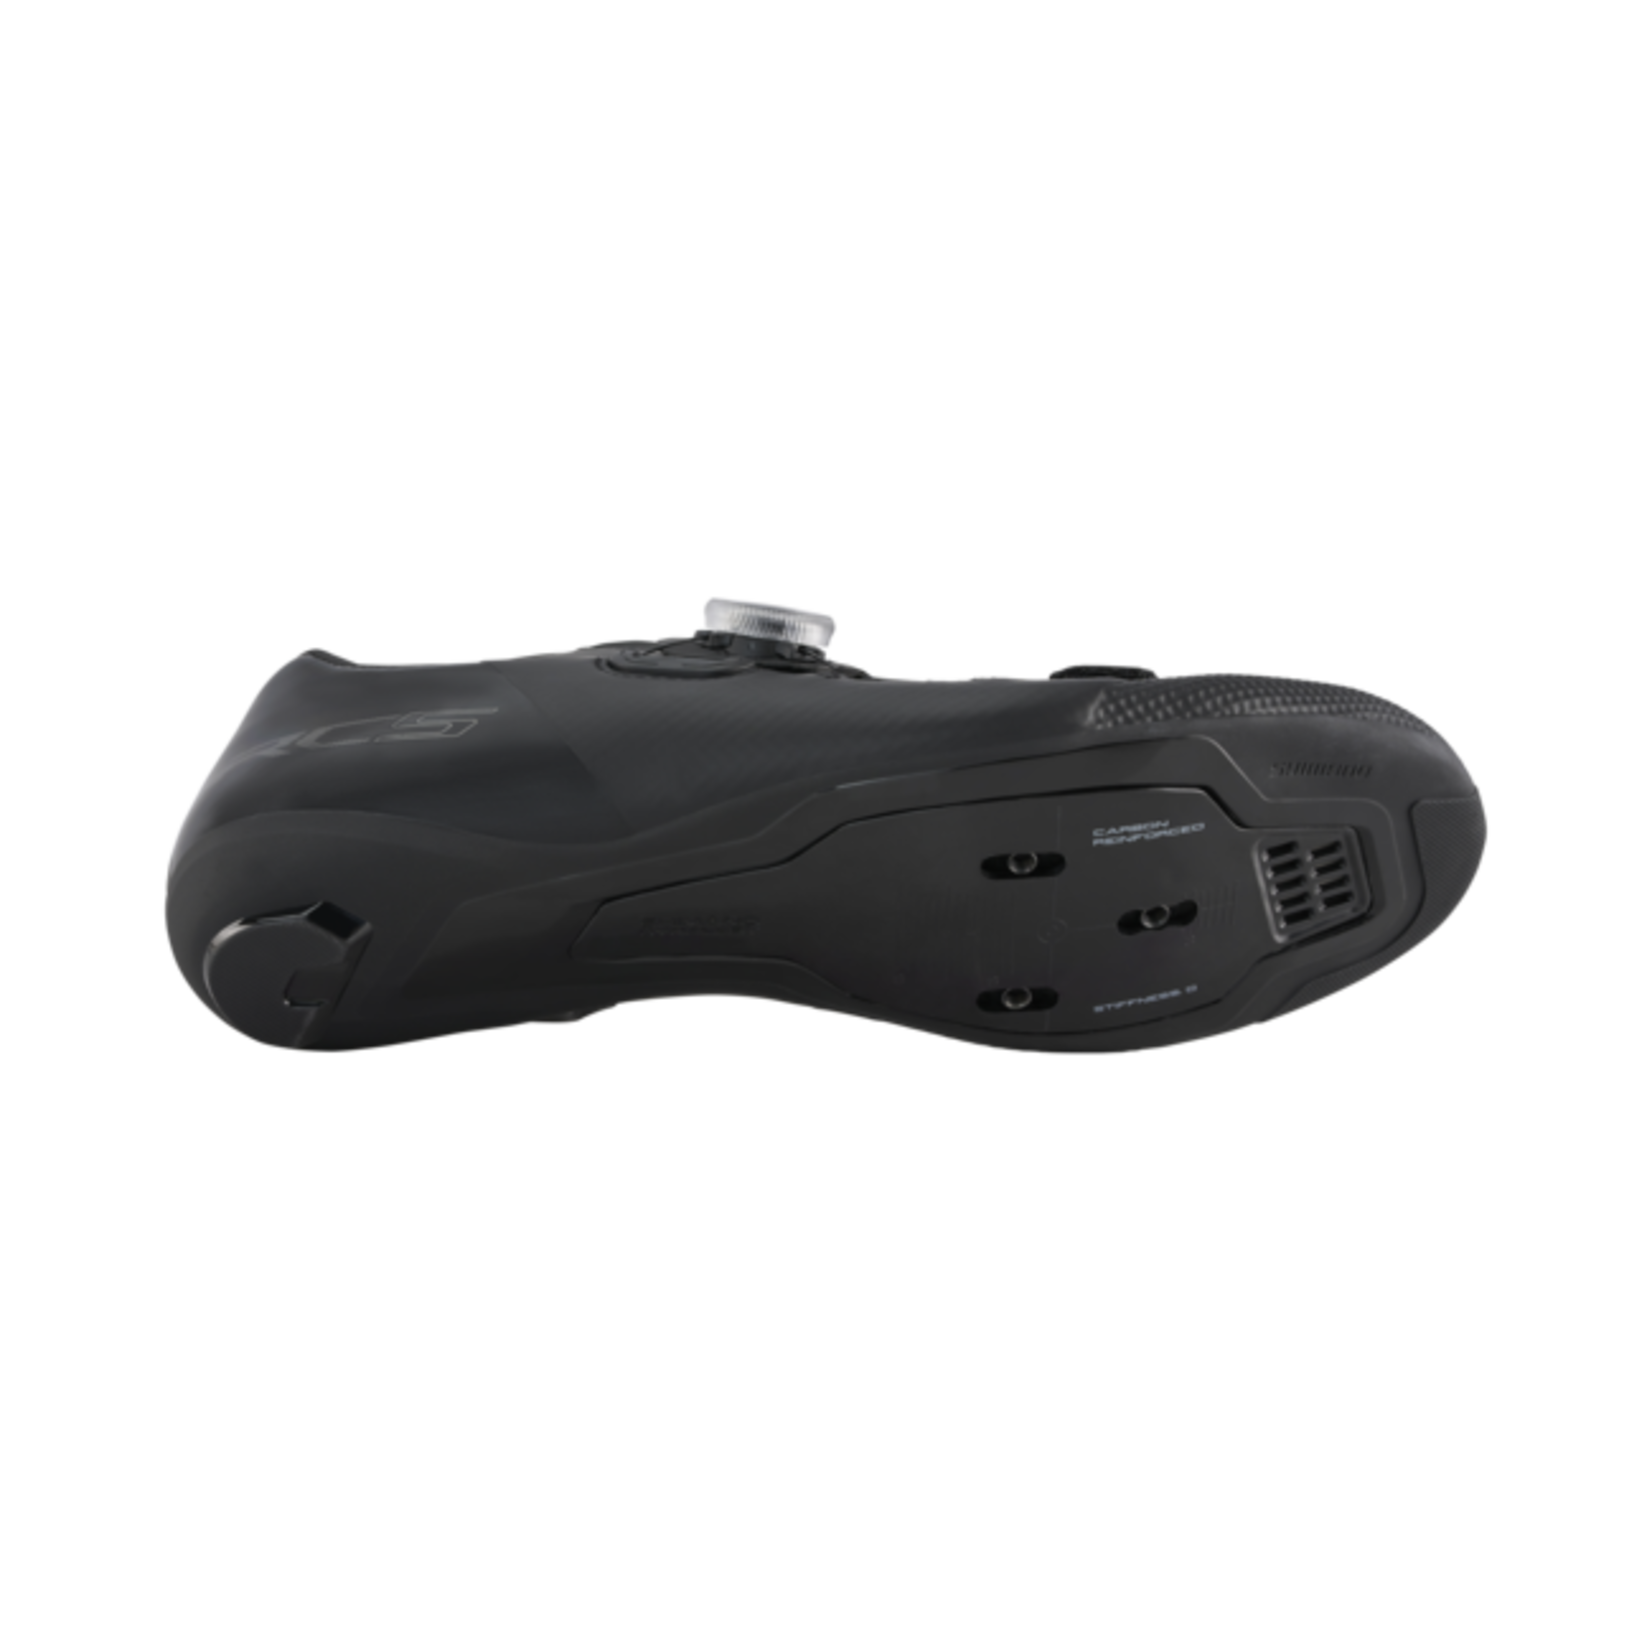 SHIMANO SH-RC502 WIDE BICYCLE SHOES